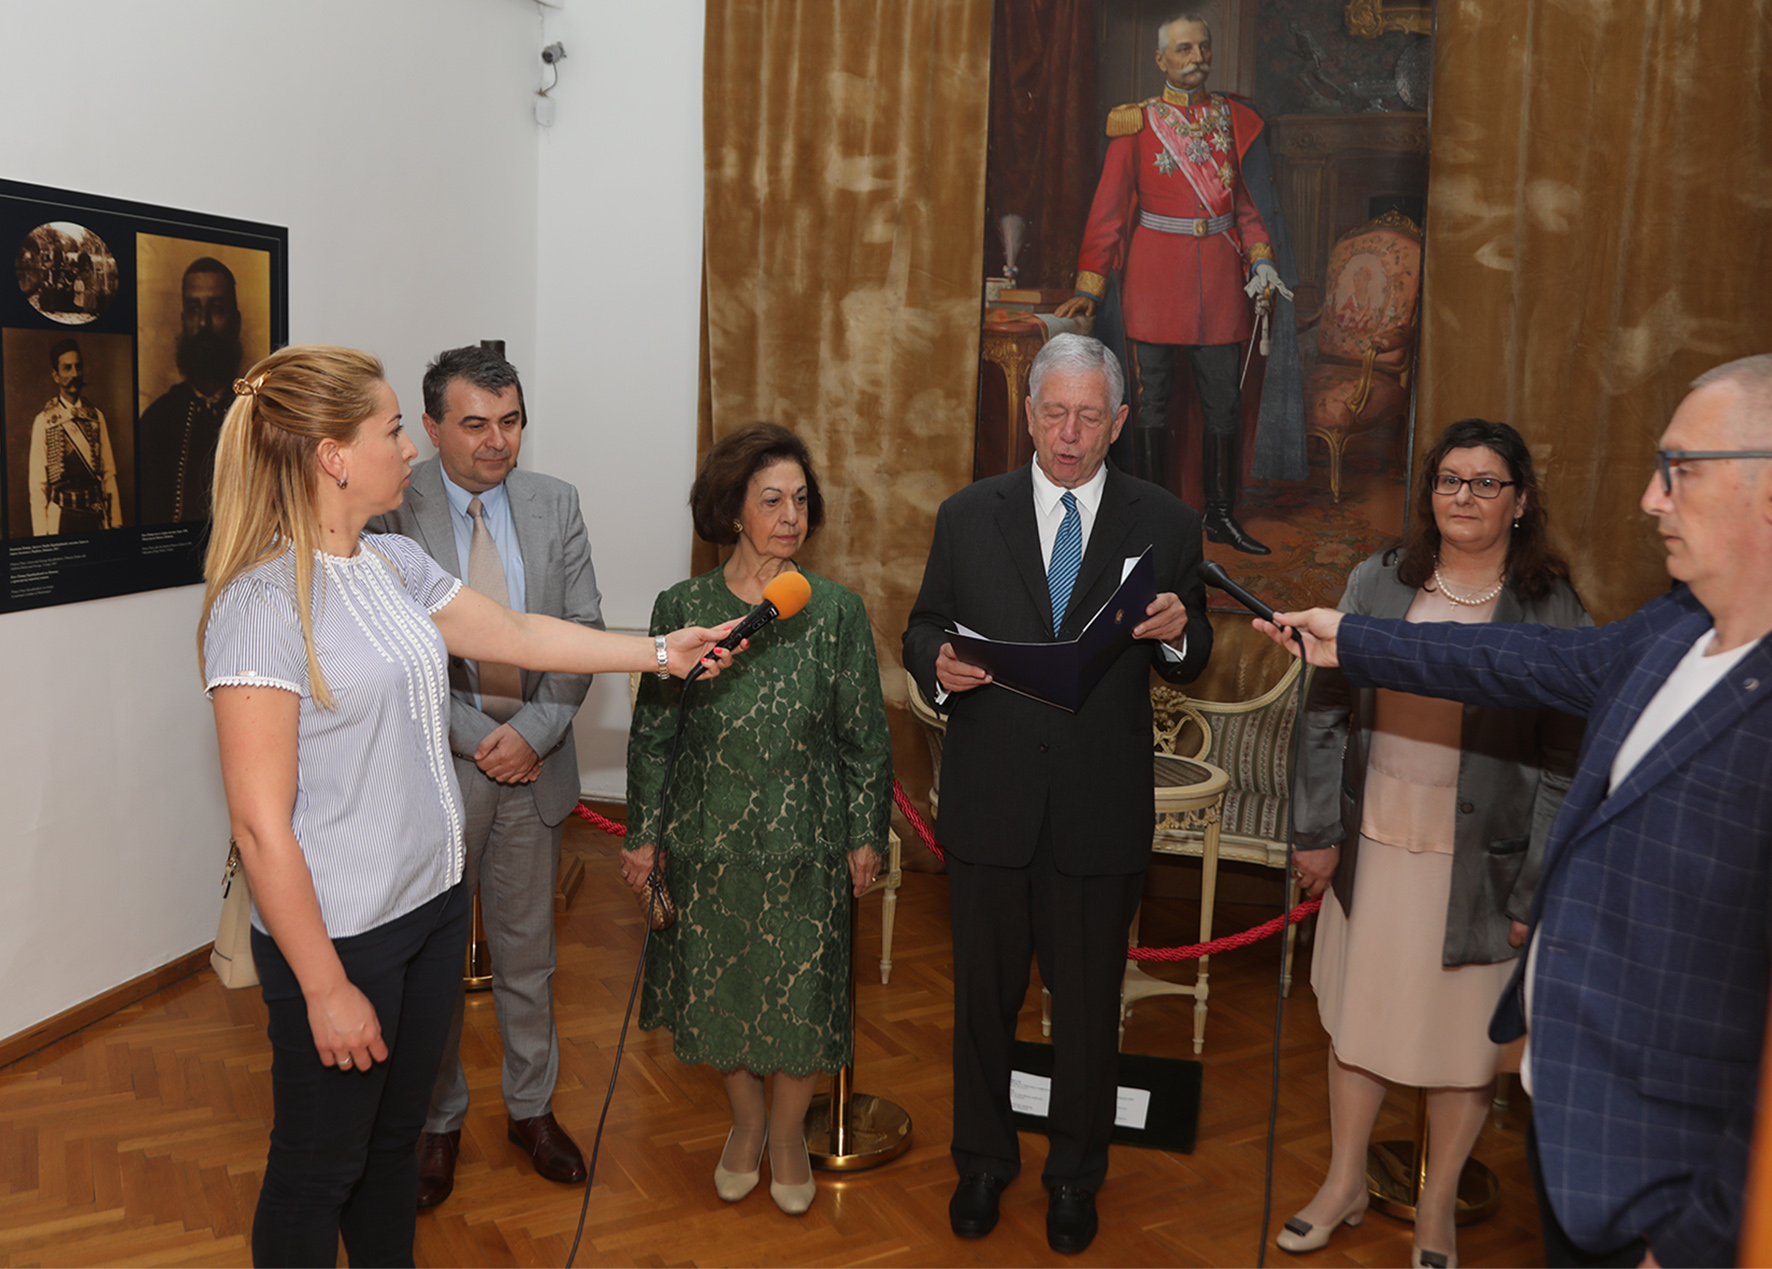 Opening of the exhibition dedicated to 100th anniversary of King Alexander I and Queen Maria’s wedding